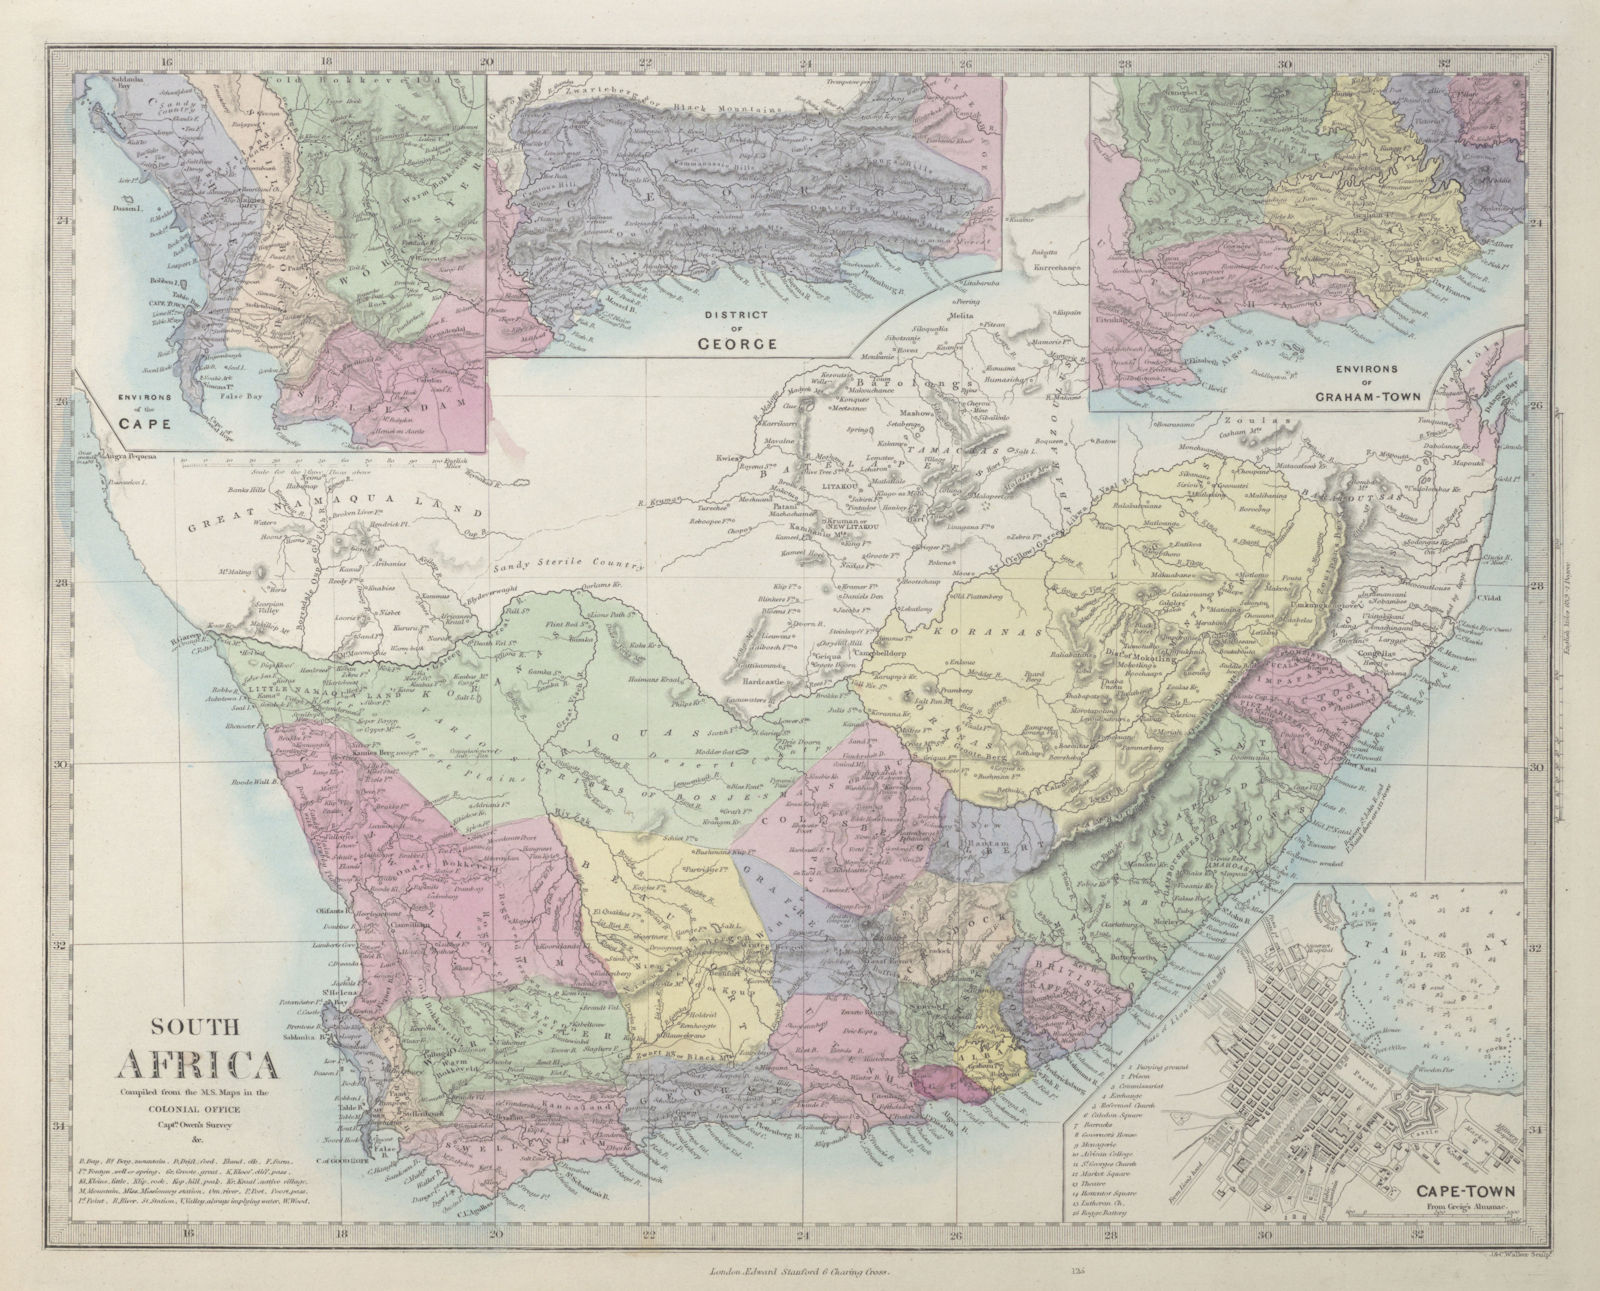 Associate Product SOUTH AFRICA. Cape Town plan. Graham Town. District of George. SDUK 1857 map